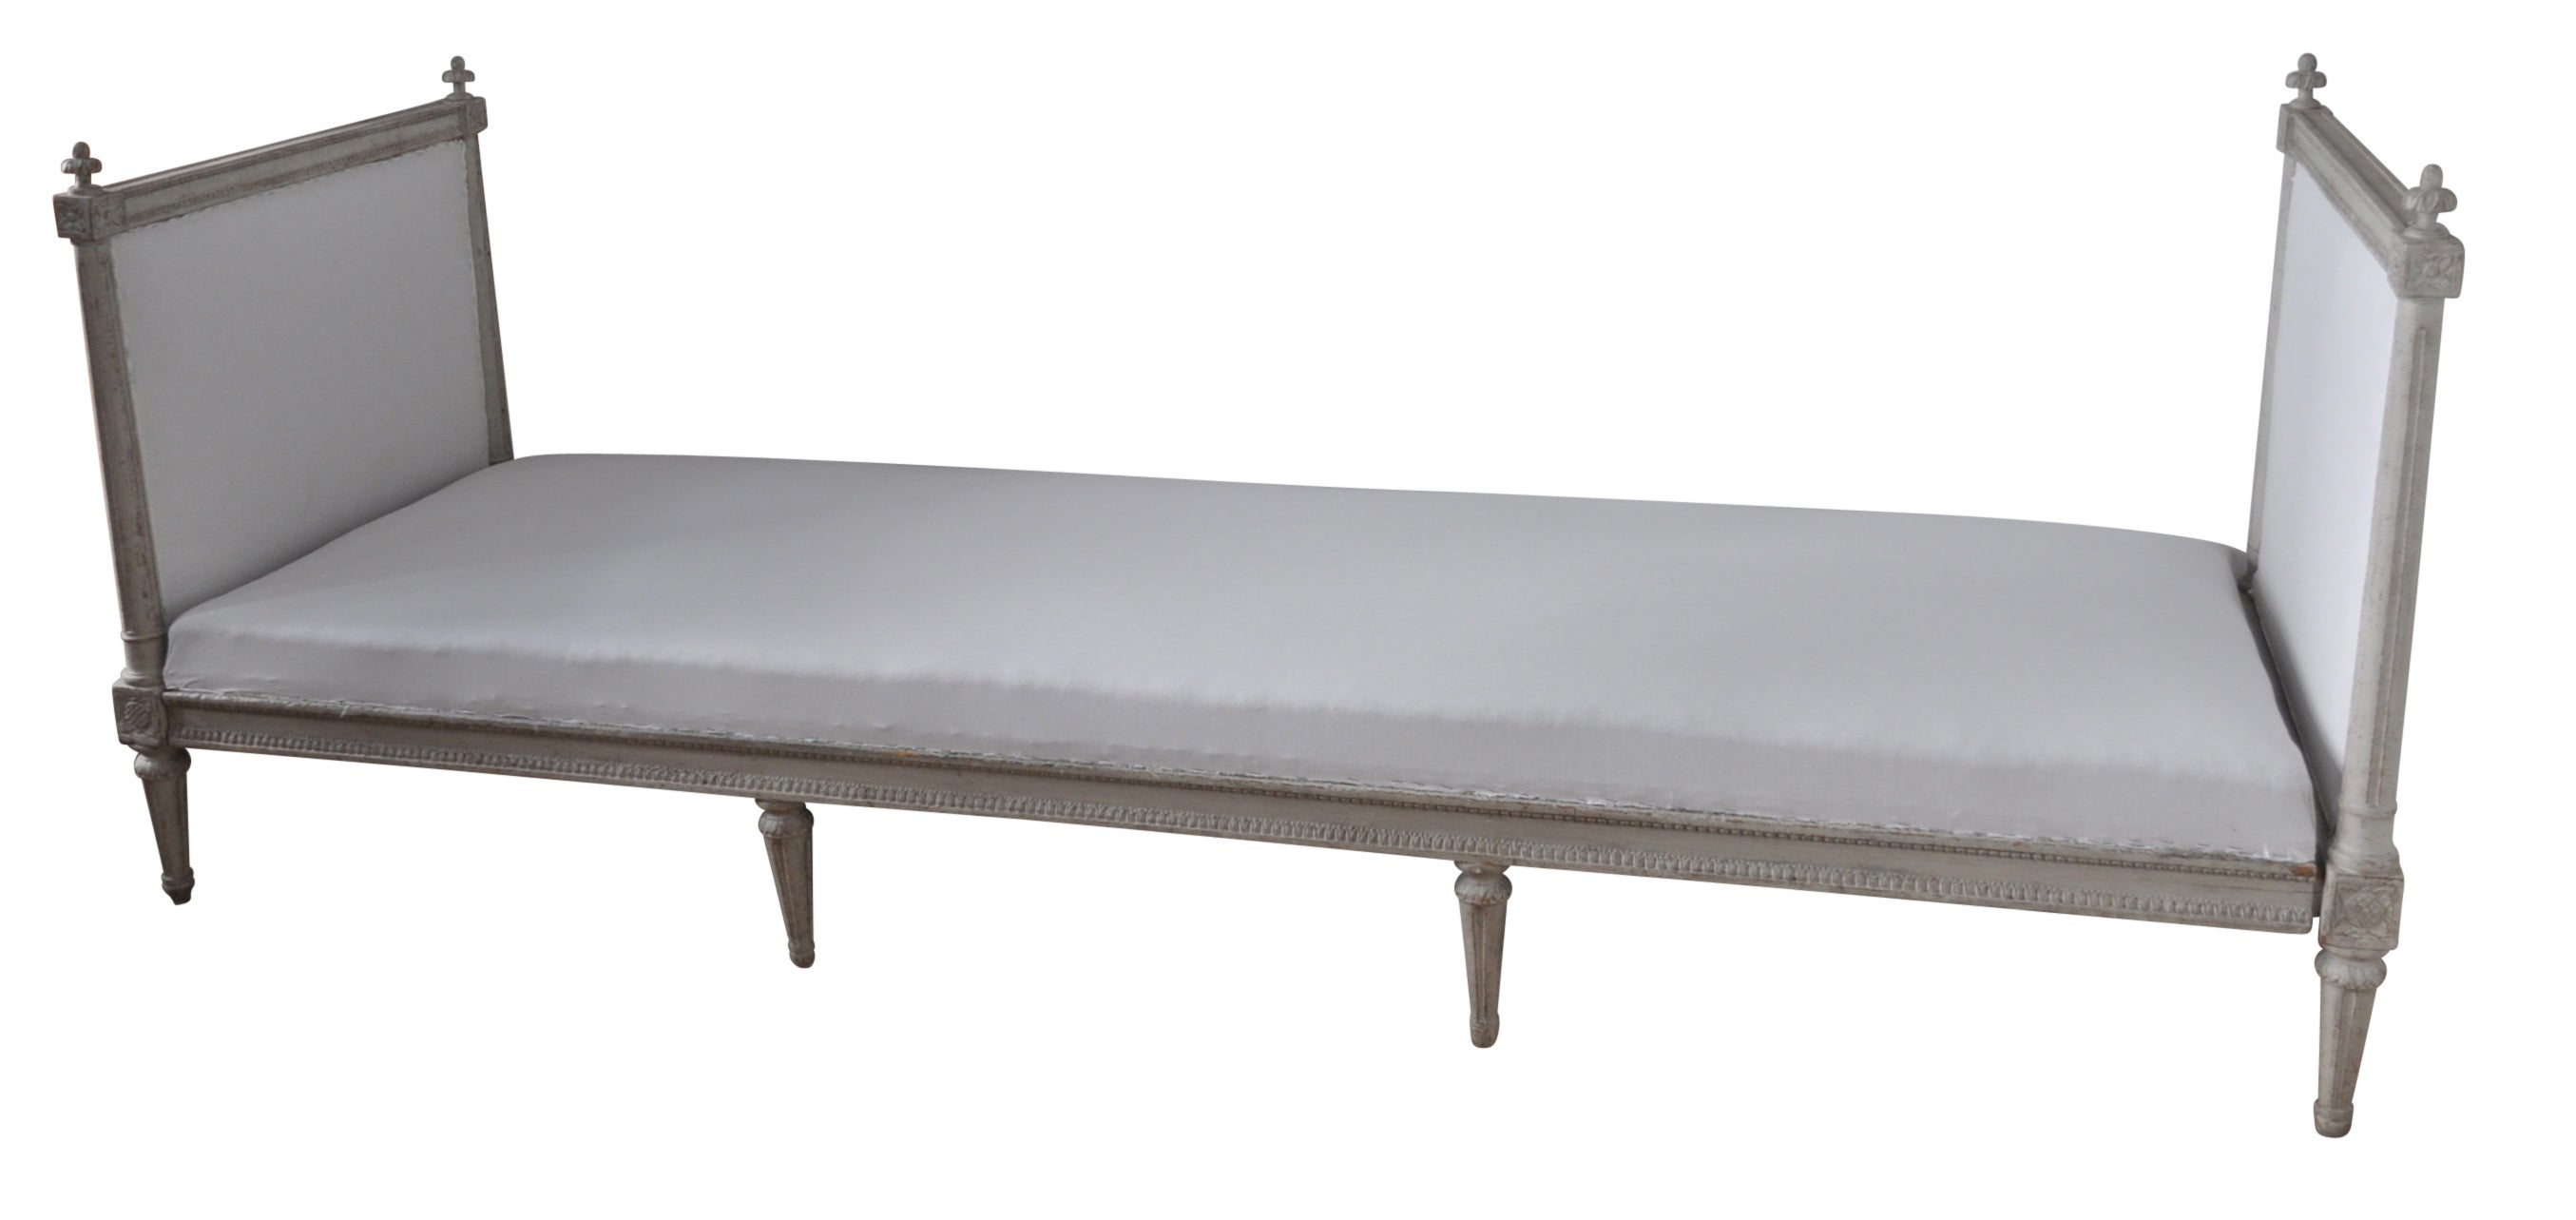 18th Century Gustavian Daybed